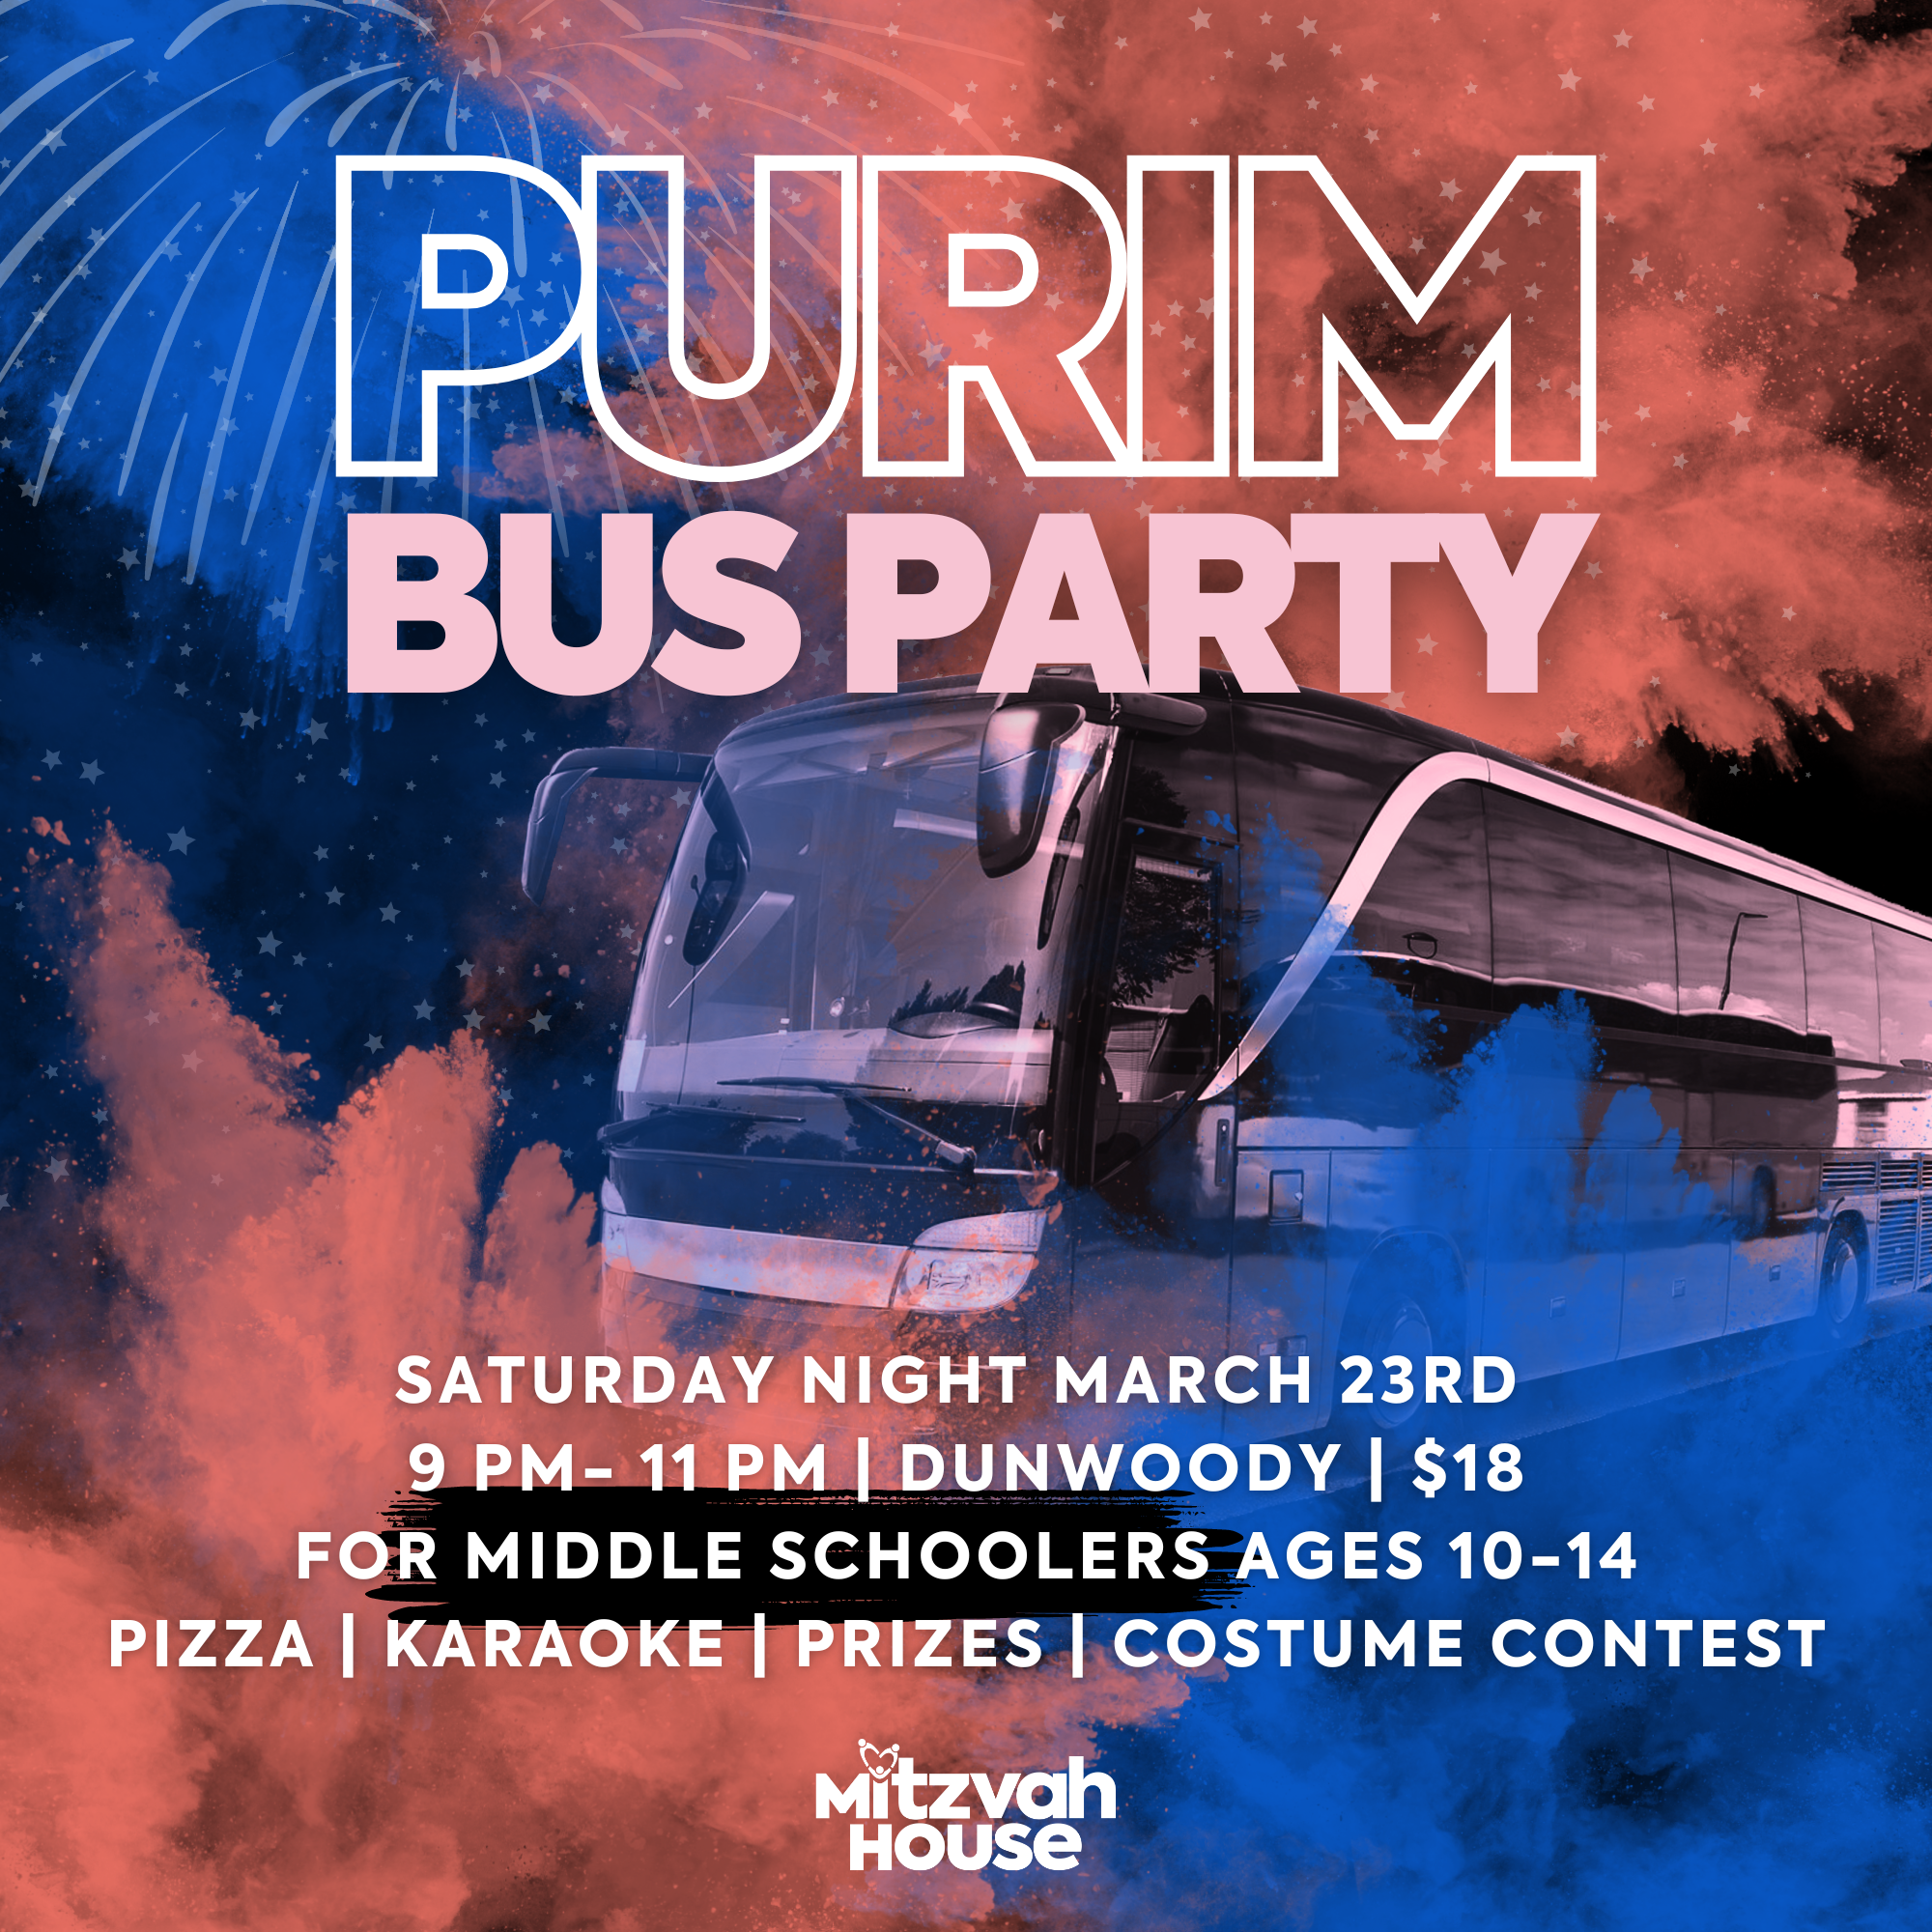 Middle School Purim Bus Party